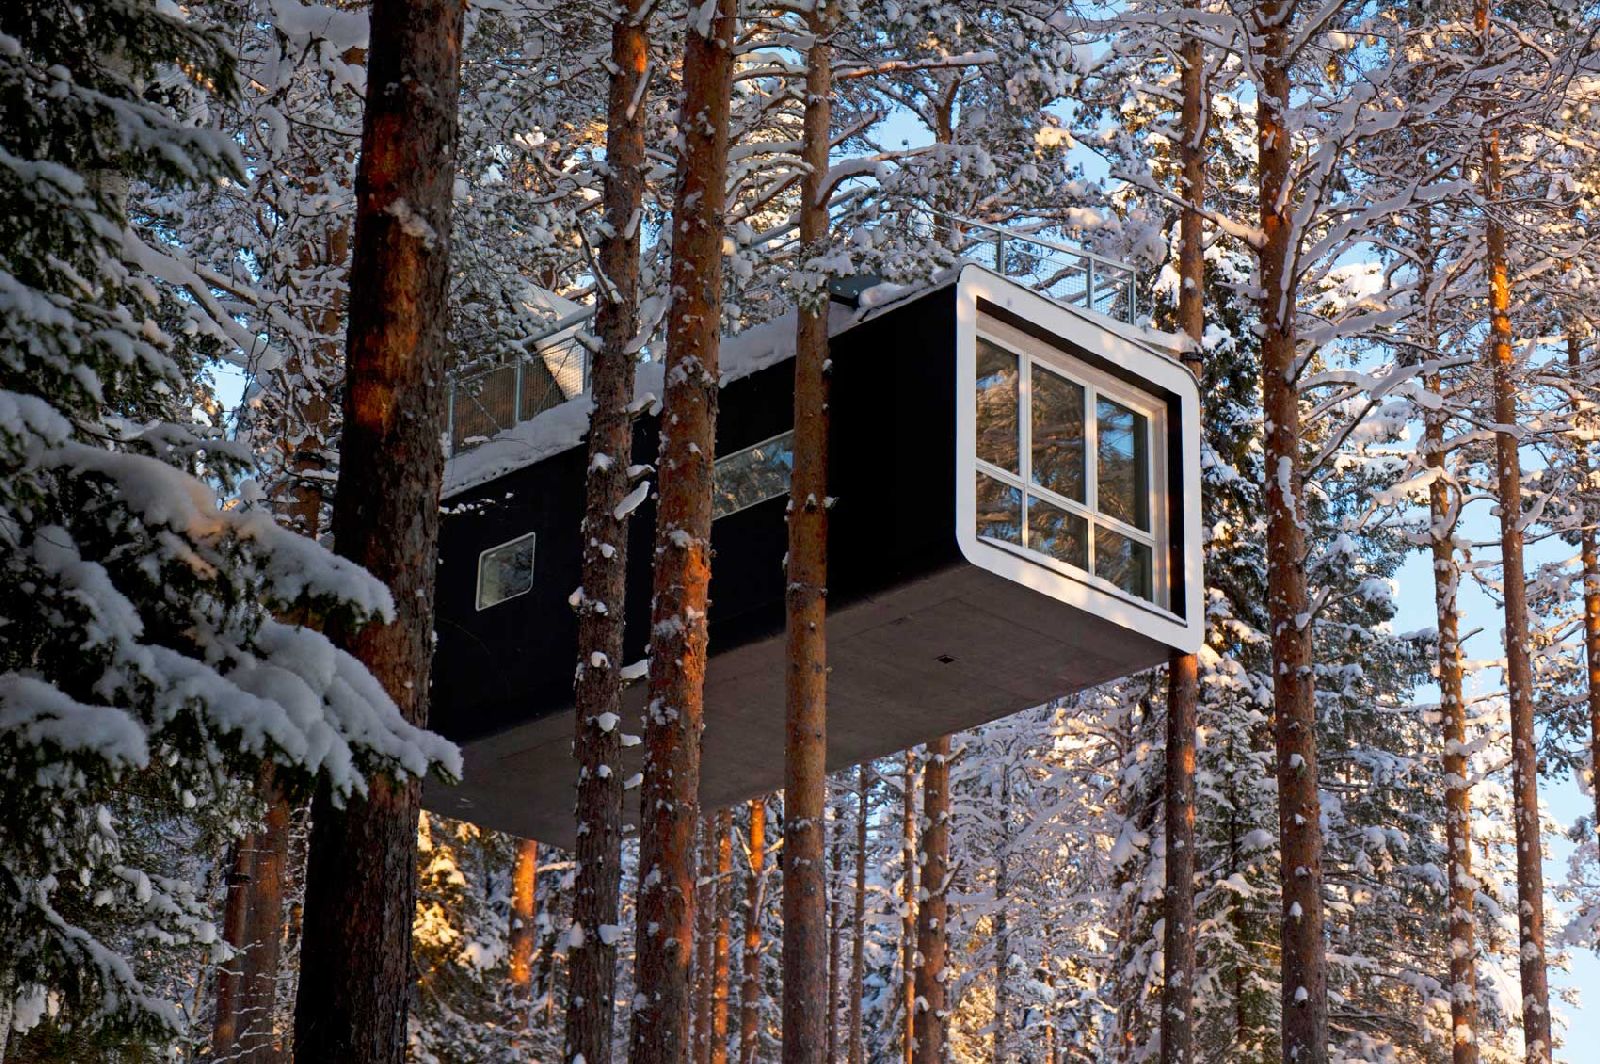 Cabin in the treetops at the Treehotel in Sweden